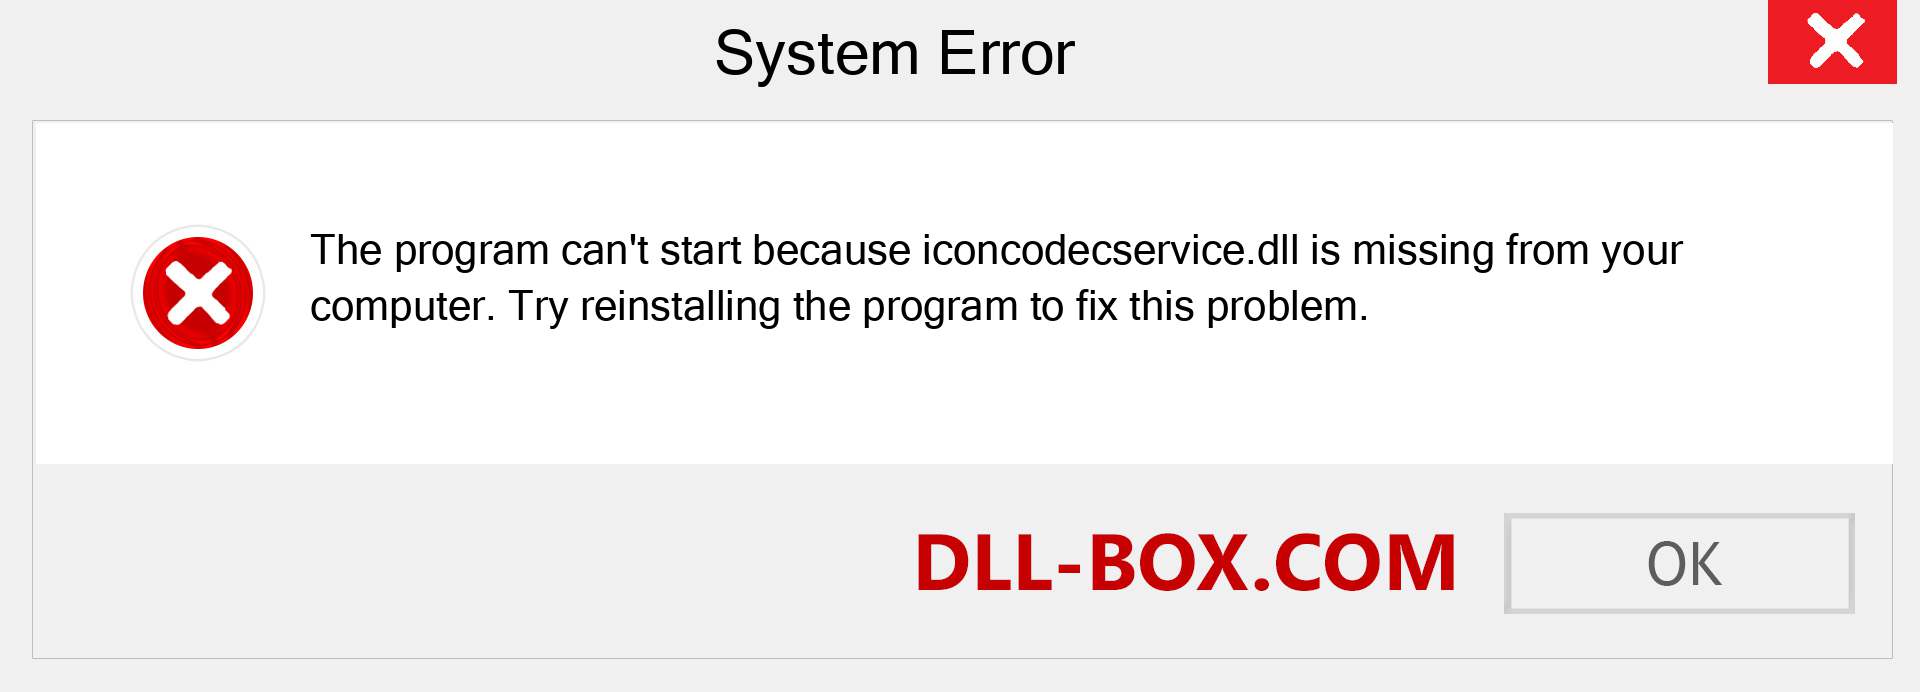  iconcodecservice.dll file is missing?. Download for Windows 7, 8, 10 - Fix  iconcodecservice dll Missing Error on Windows, photos, images